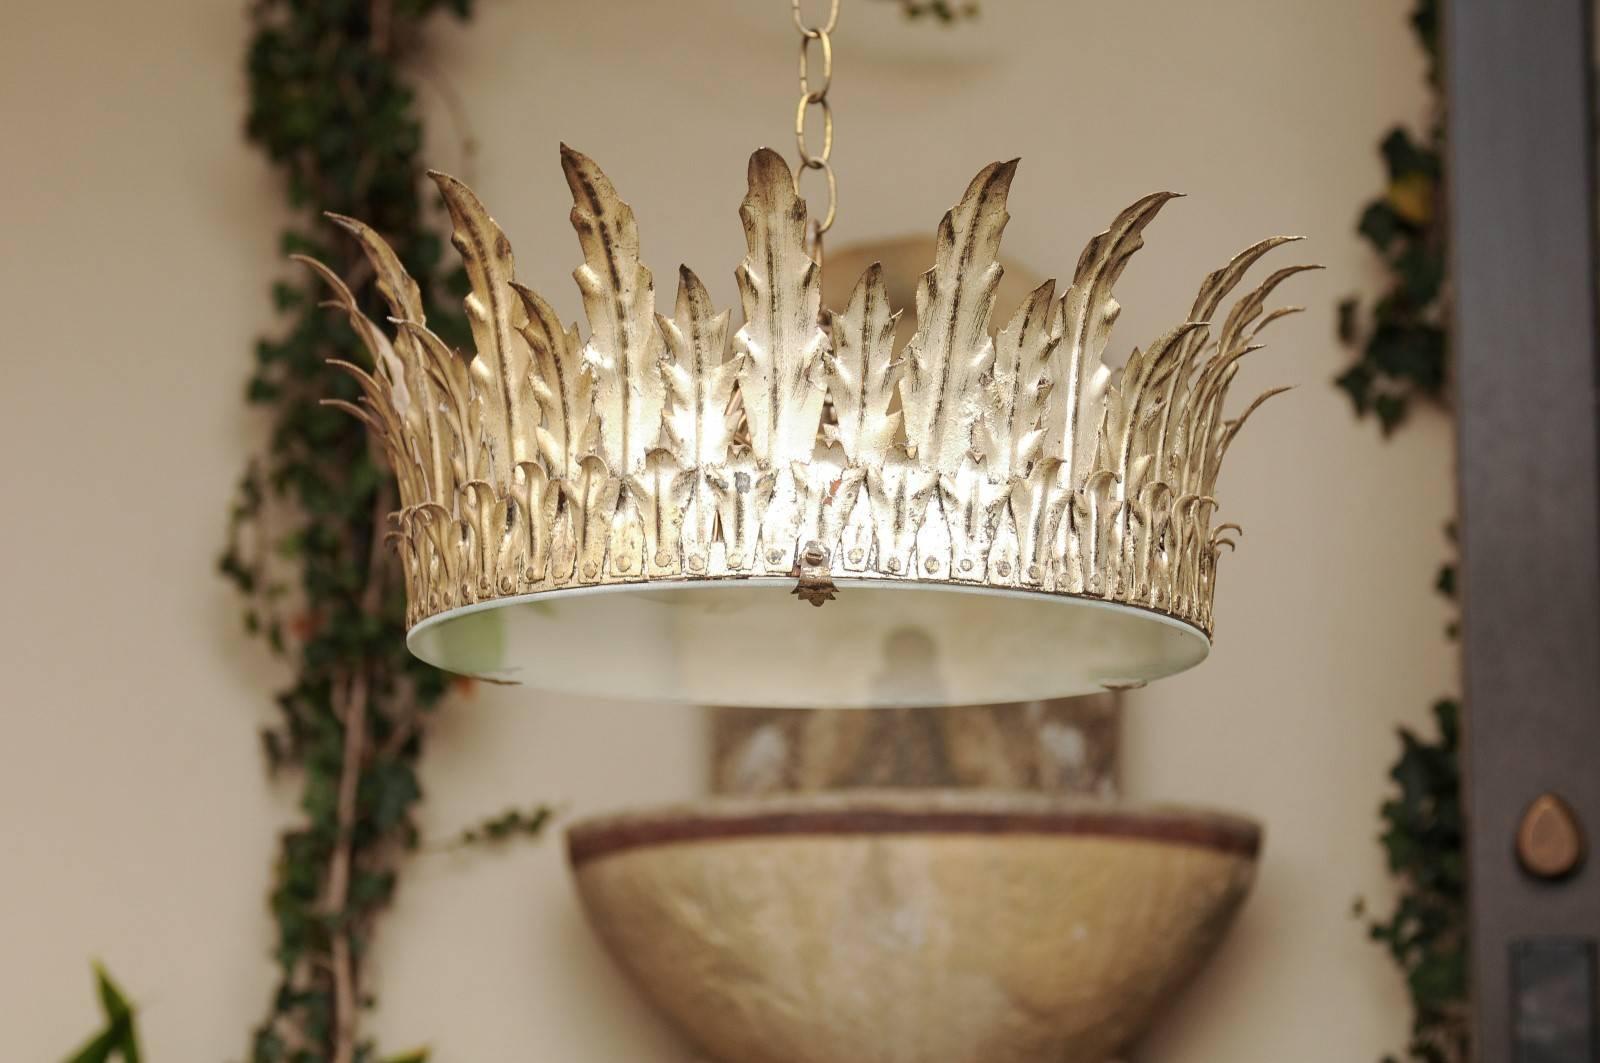 20th Century Spanish Vintage Silver Gilt Metal Crown Light Fixture with Foliage Motifs, 1950s